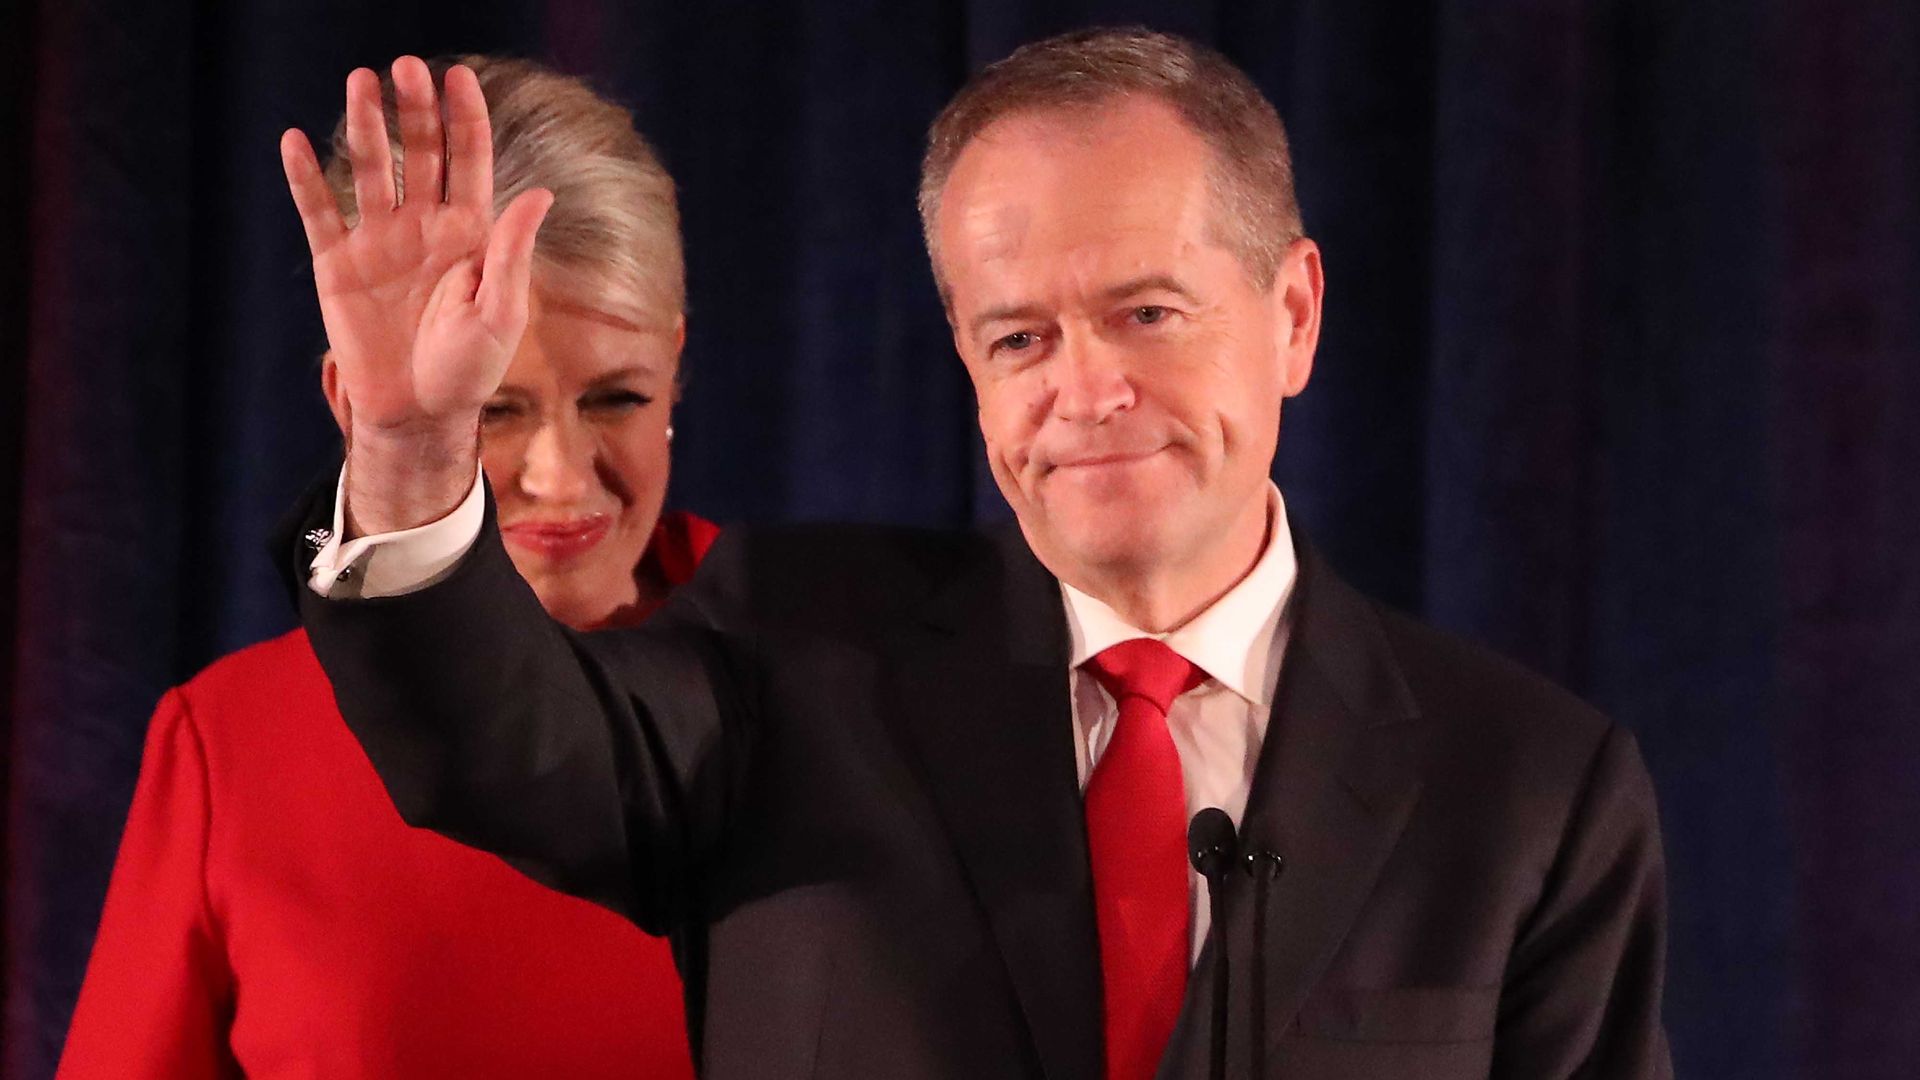  Leader of the Opposition and Leader of the Labor Party Bill Shorten